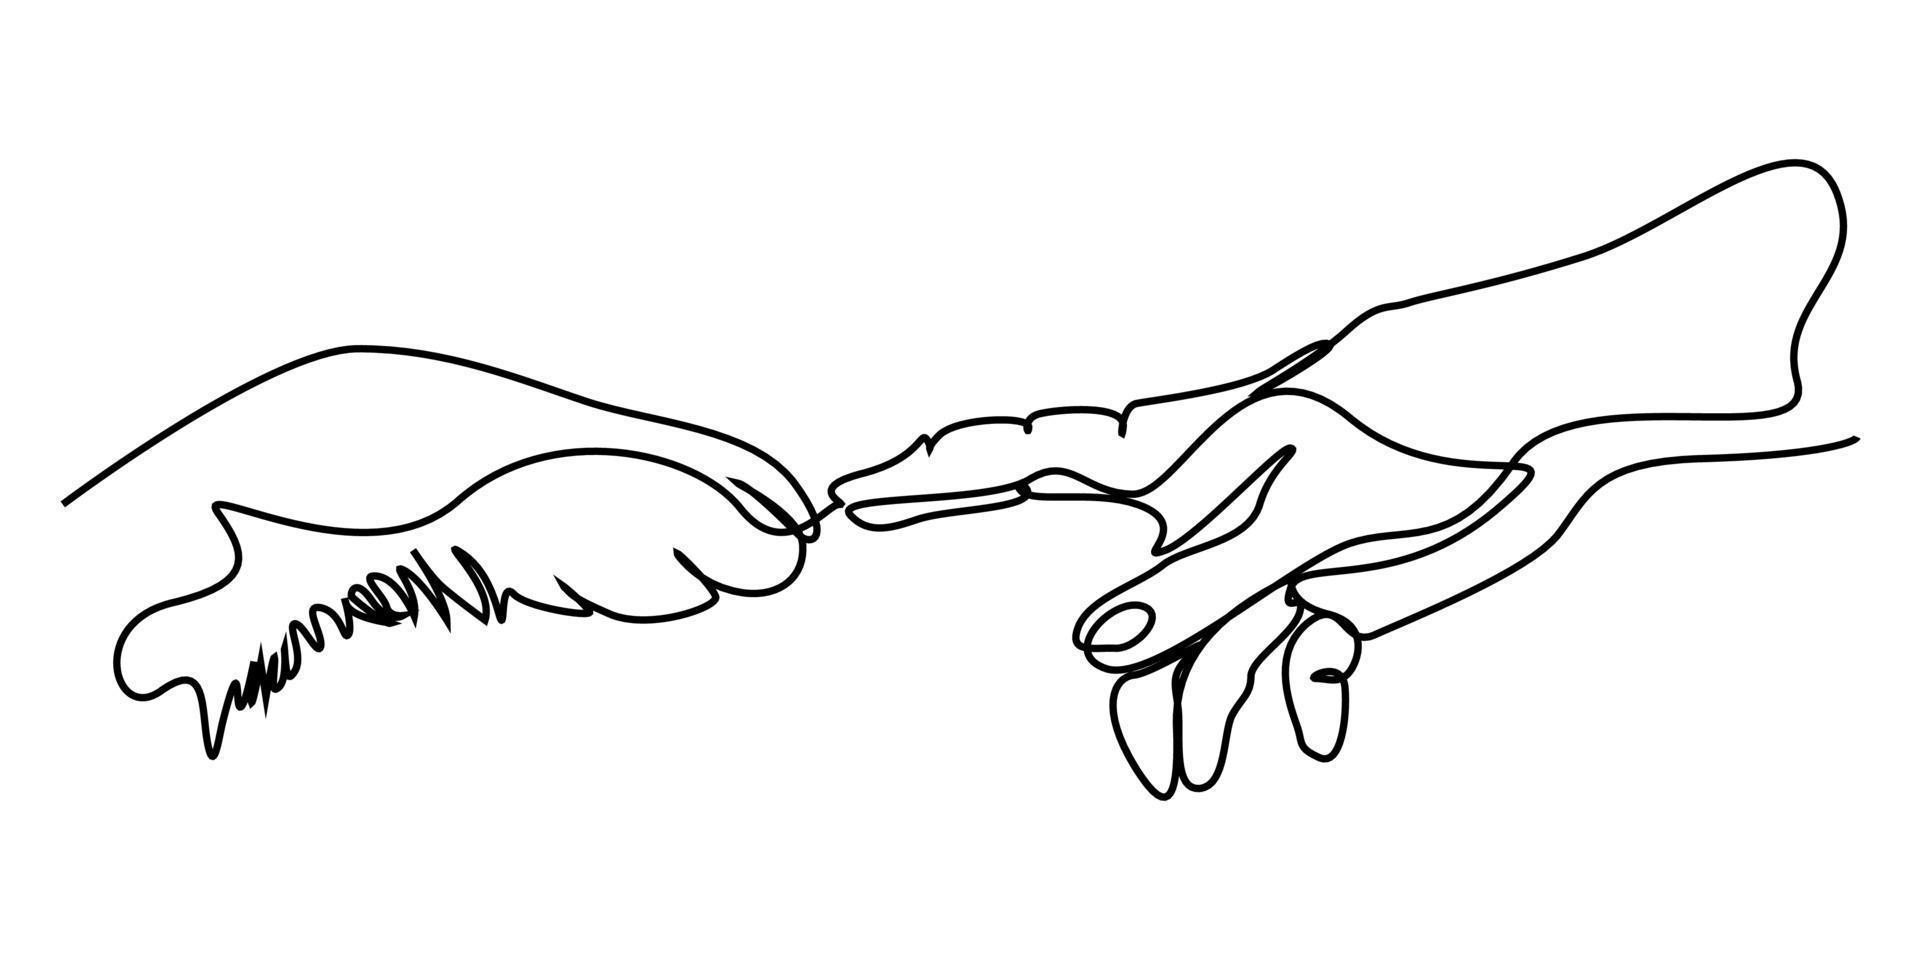 continuous line A dog is giving a paw to a person. dog paws in human hand vector